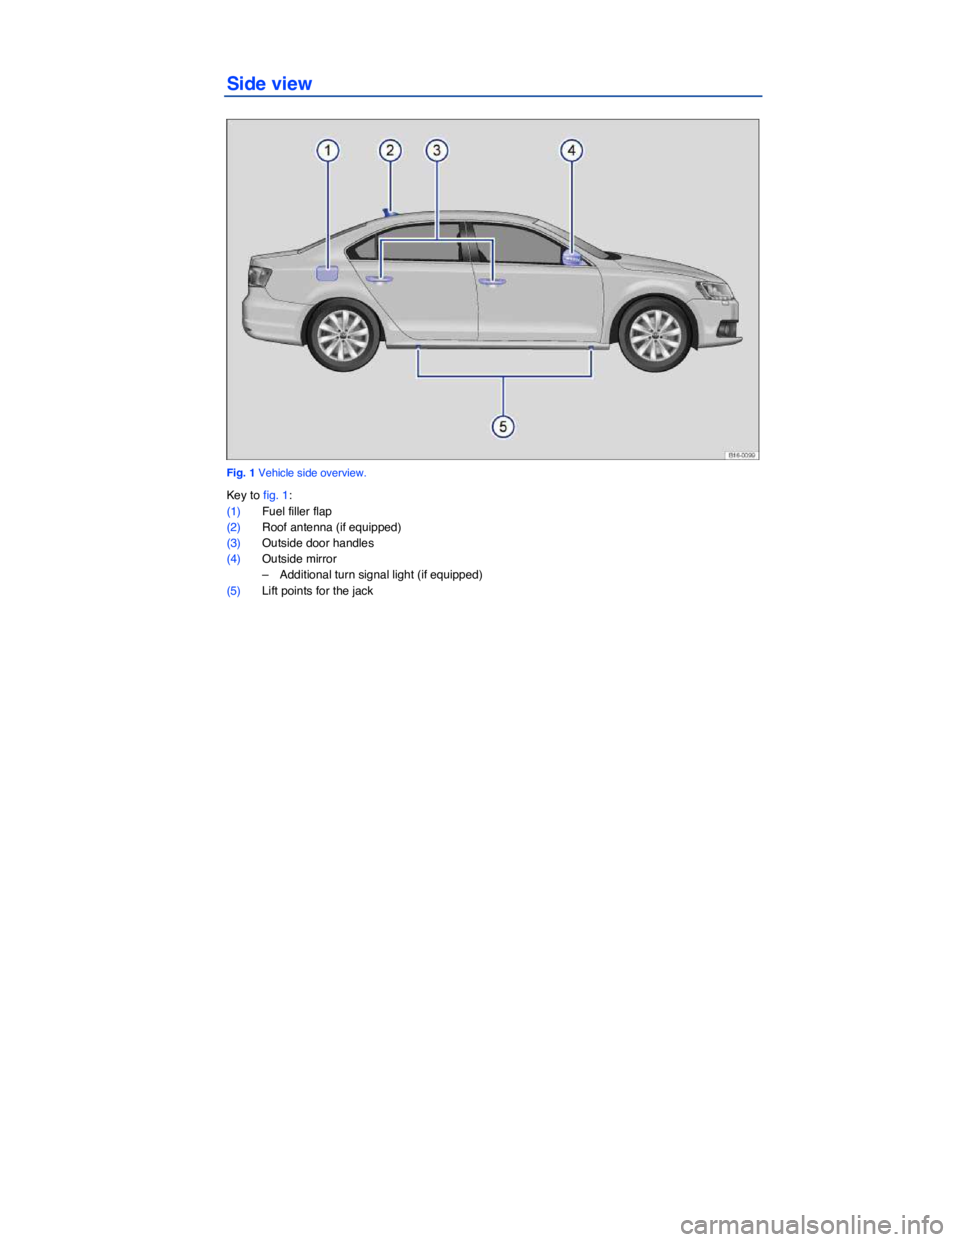 VOLKSWAGEN JETTA 2.5 SE 2011  Owners Manual  
Side view 
 
Fig. 1 Vehicle side overview. 
Key to fig. 1: 
(1) Fuel filler flap  
(2) Roof antenna (if equipped) 
(3) Outside door handles  
(4) Outside mirror  
–  Additional turn signal light (